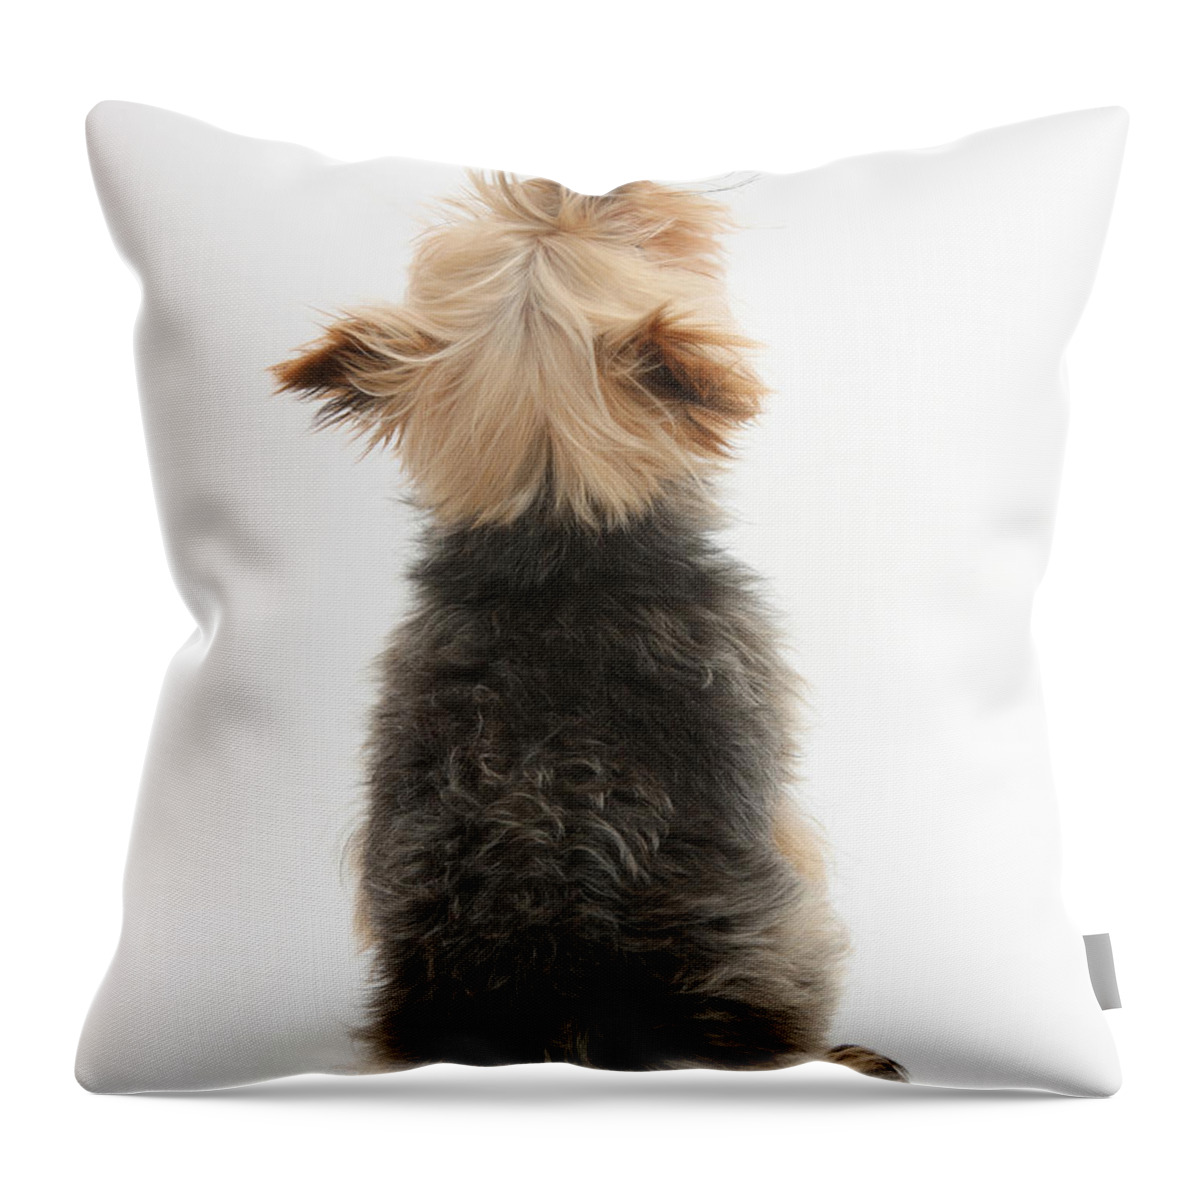 Dog Throw Pillow featuring the photograph Yorkshire Terrier by Mark Taylor